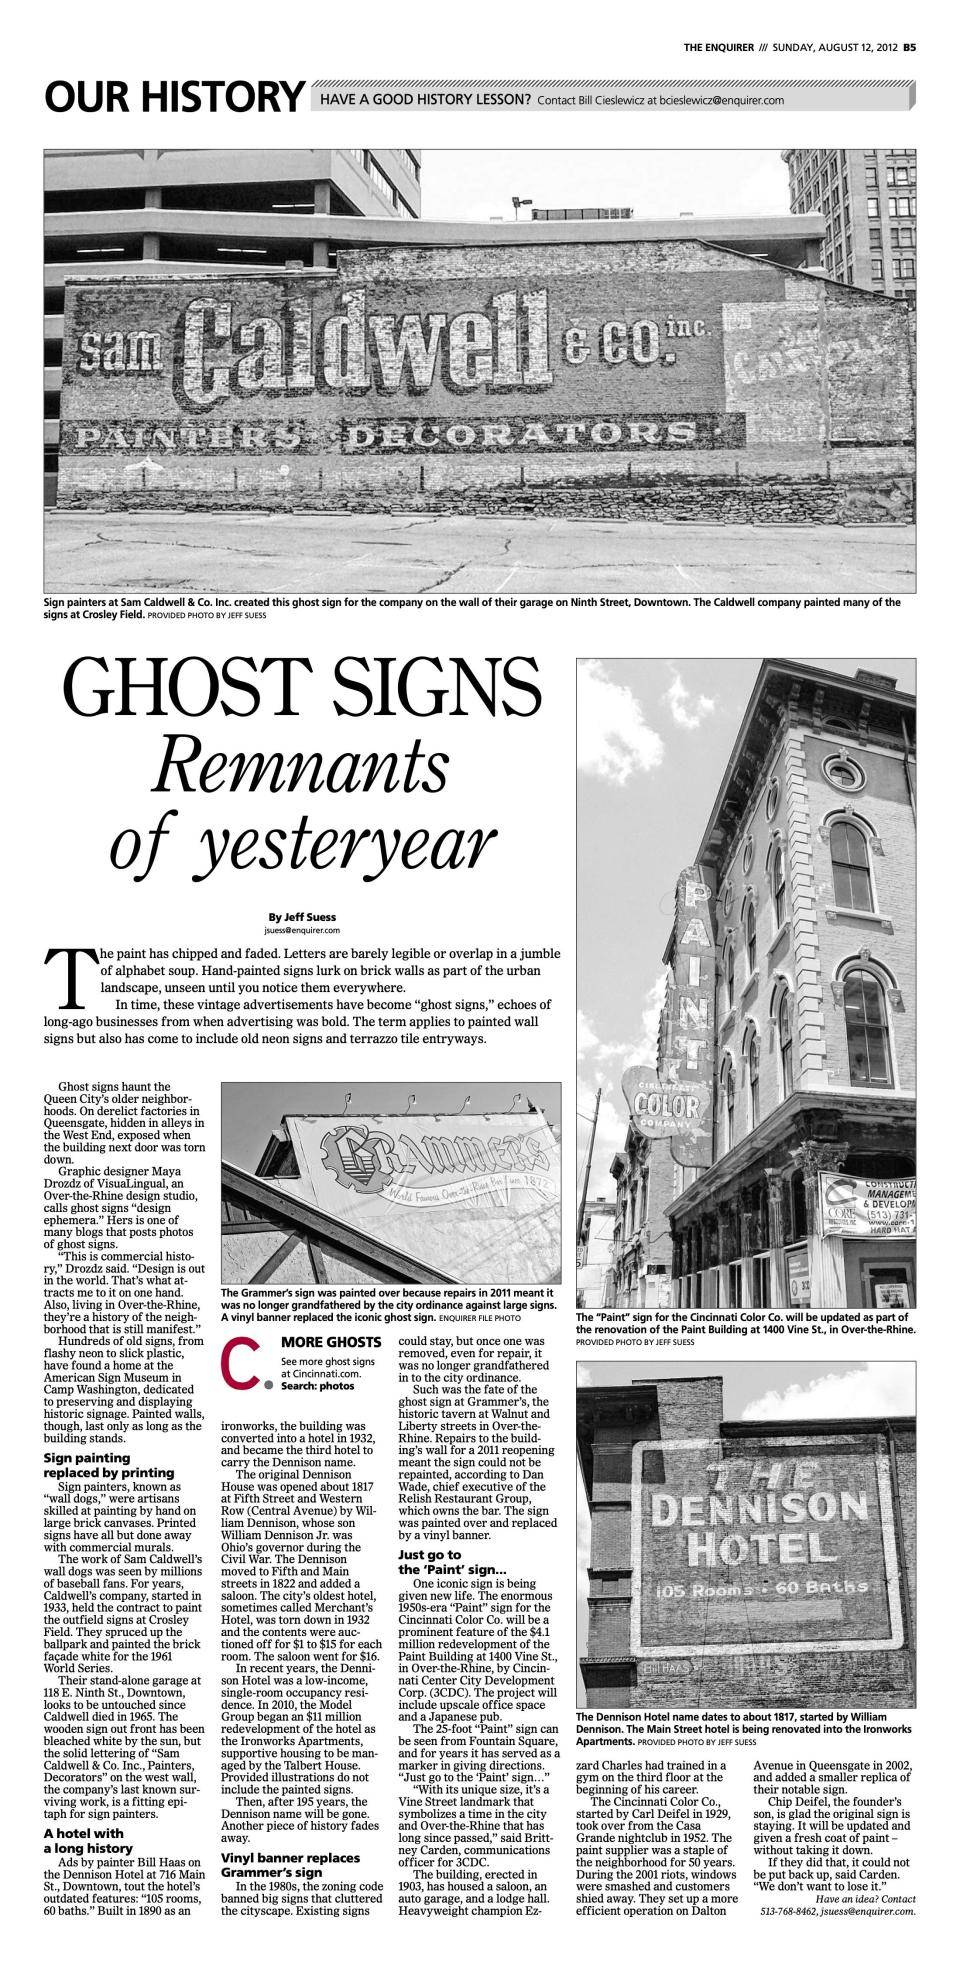 An article on historic ghost signs, faded wall advertisements, in Cincinnati appeared in The Cincinnati Enquirer, Aug. 12, 2012.